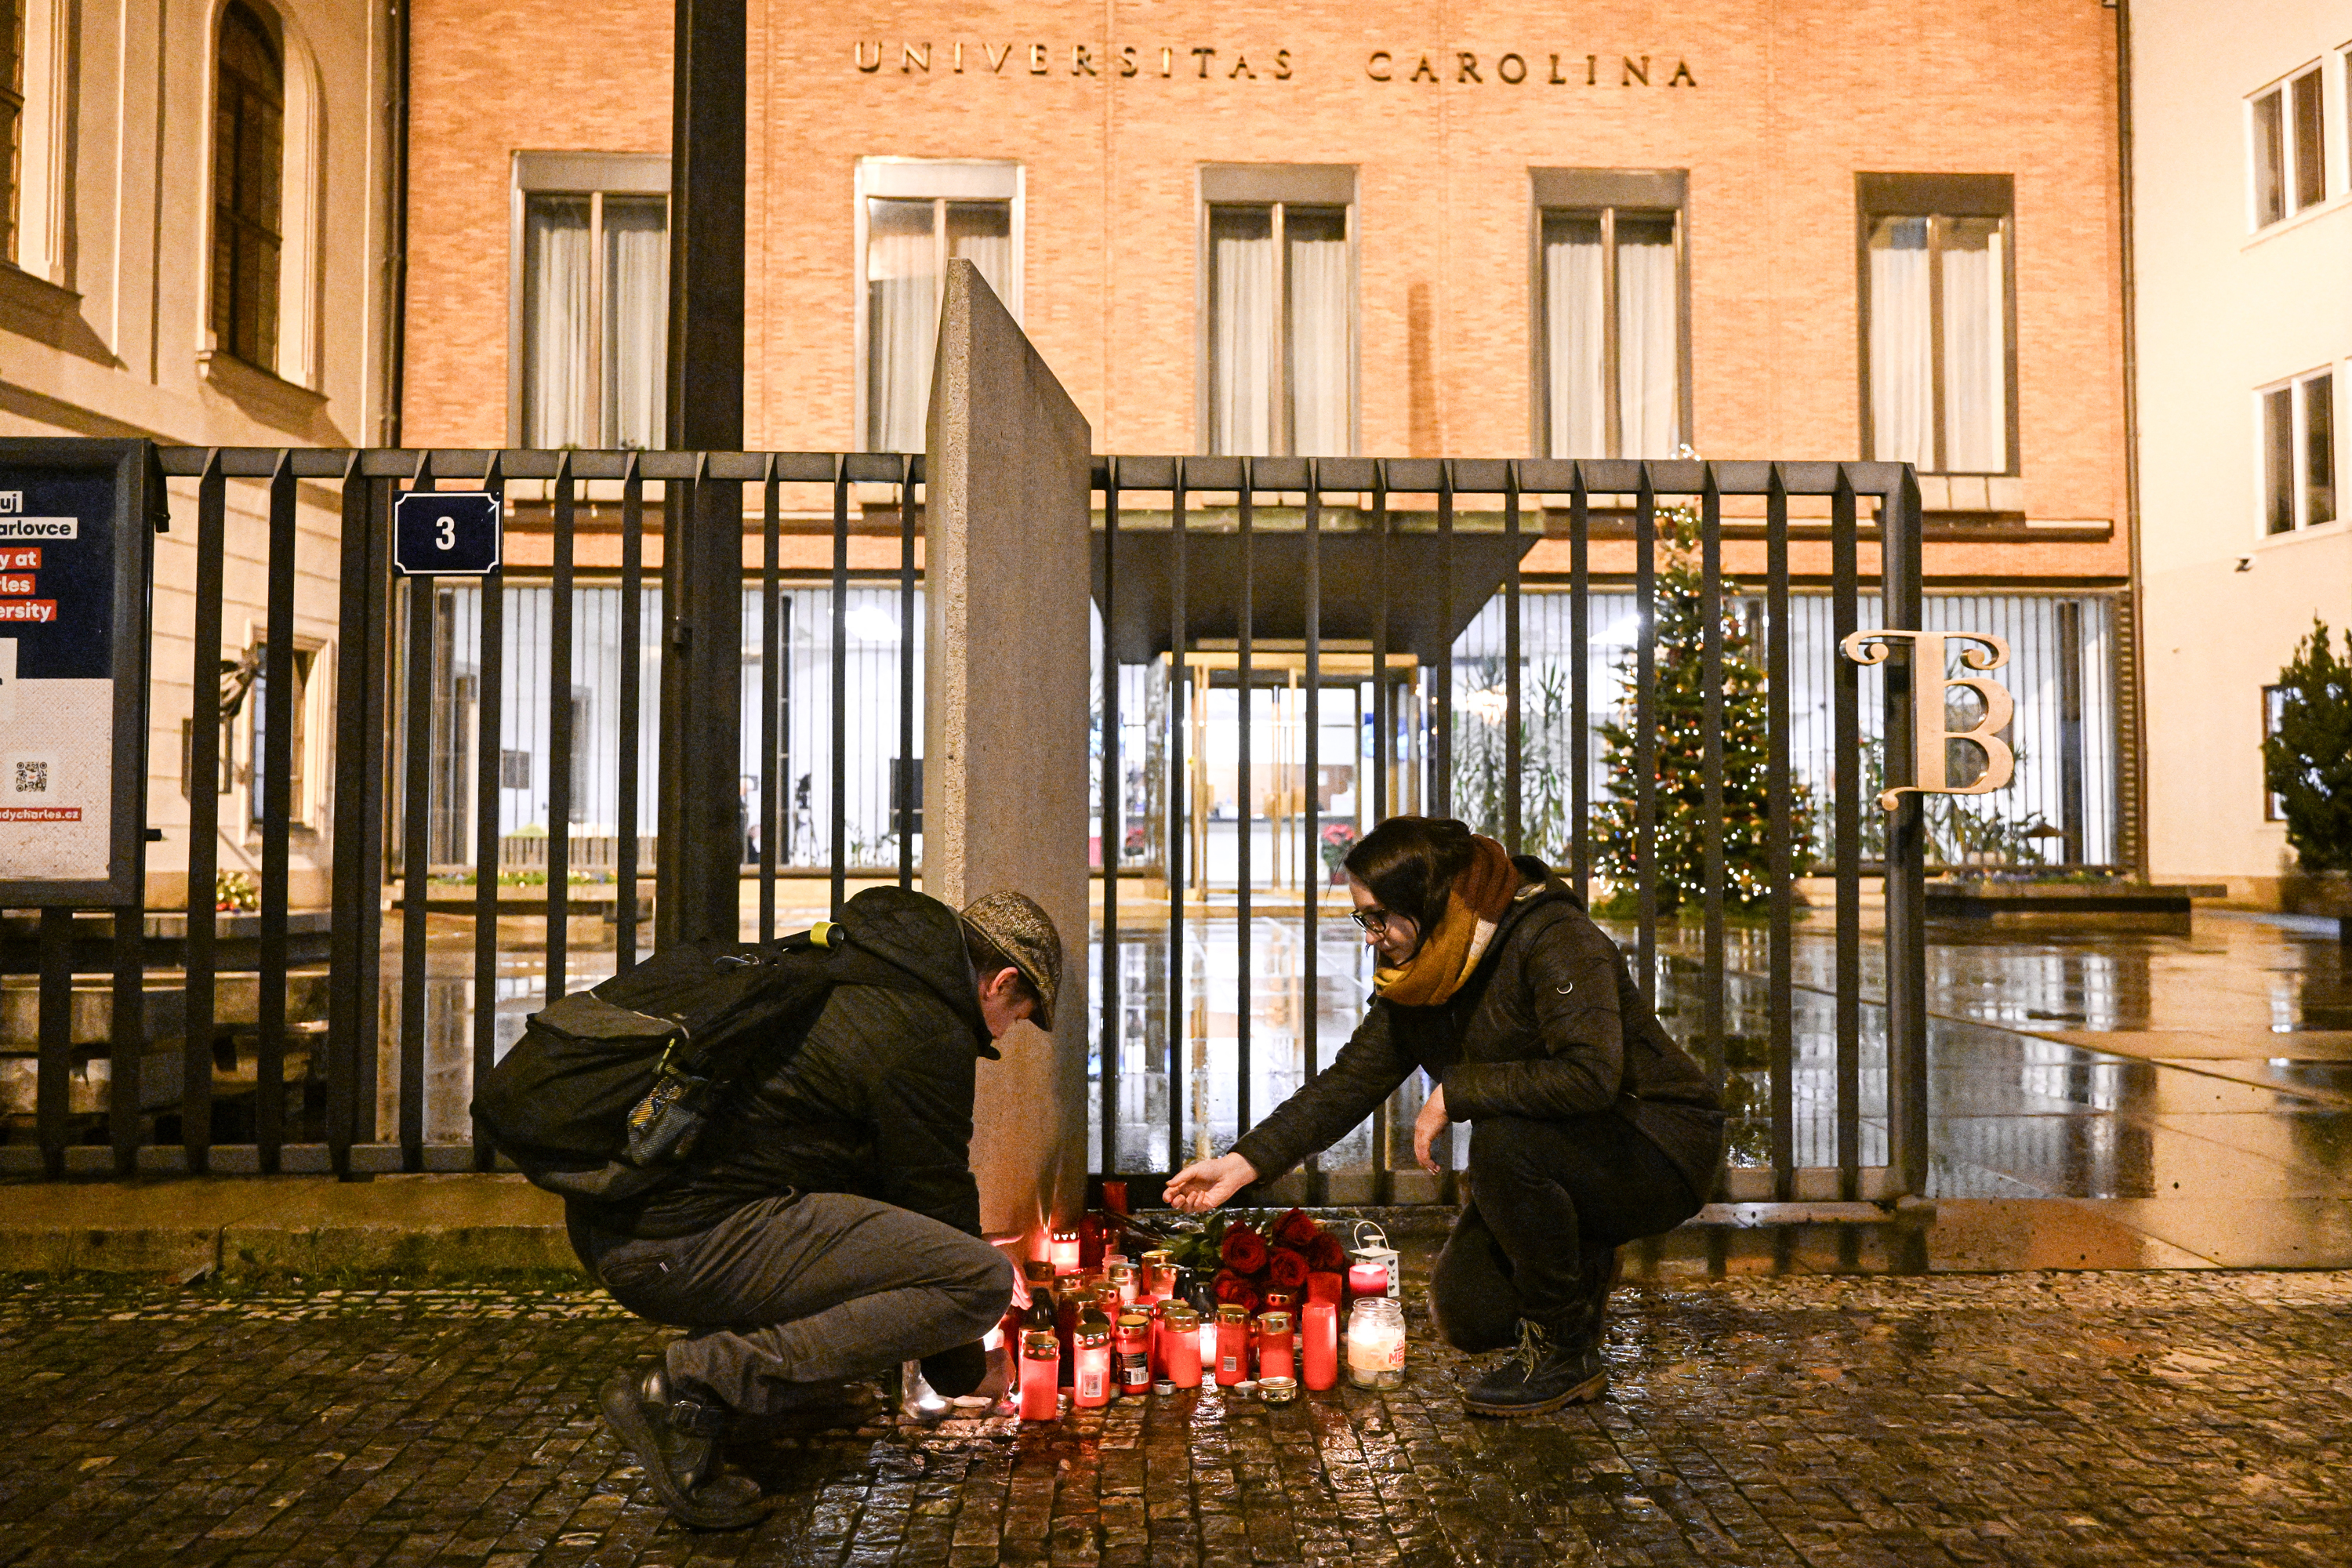 People light candles for the shooting victims at the Charles University main office in central Prague, on December 21.